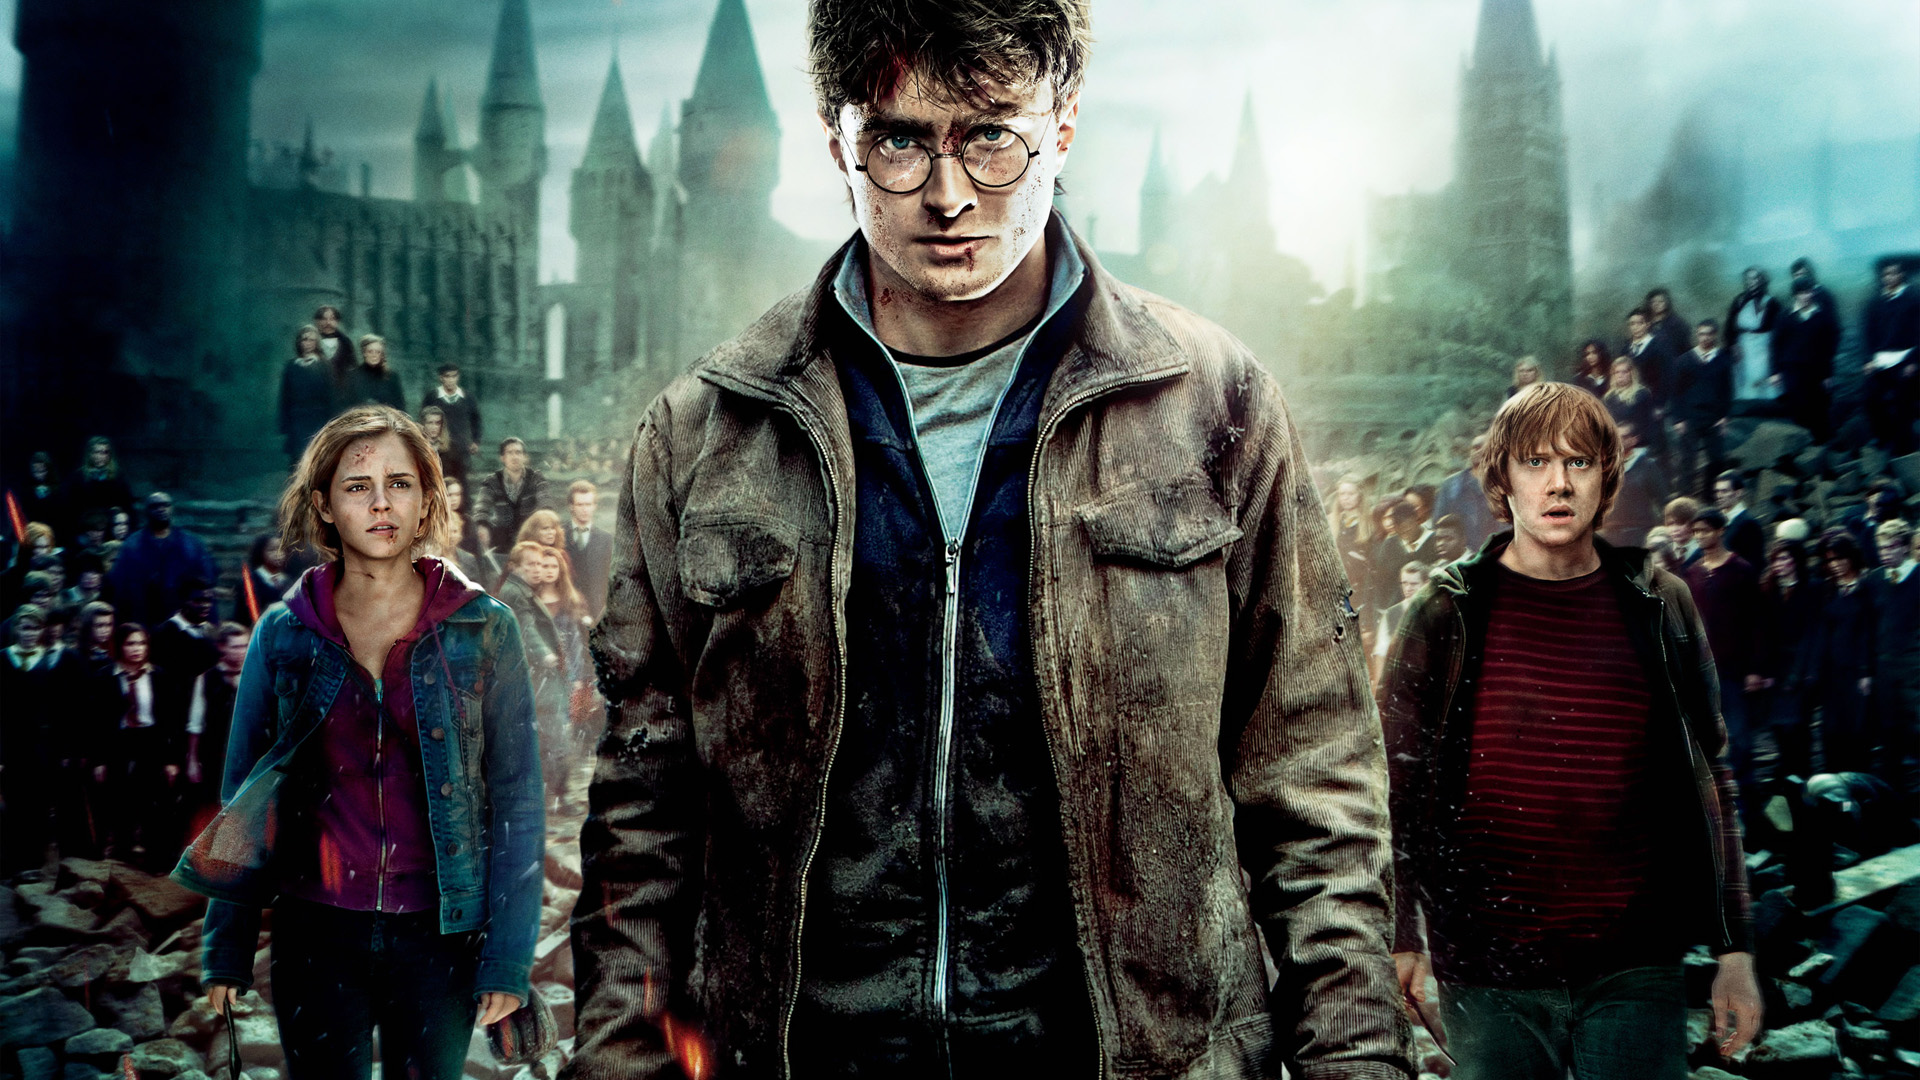 harry potter, movie, harry potter and the deathly hallows: part 2